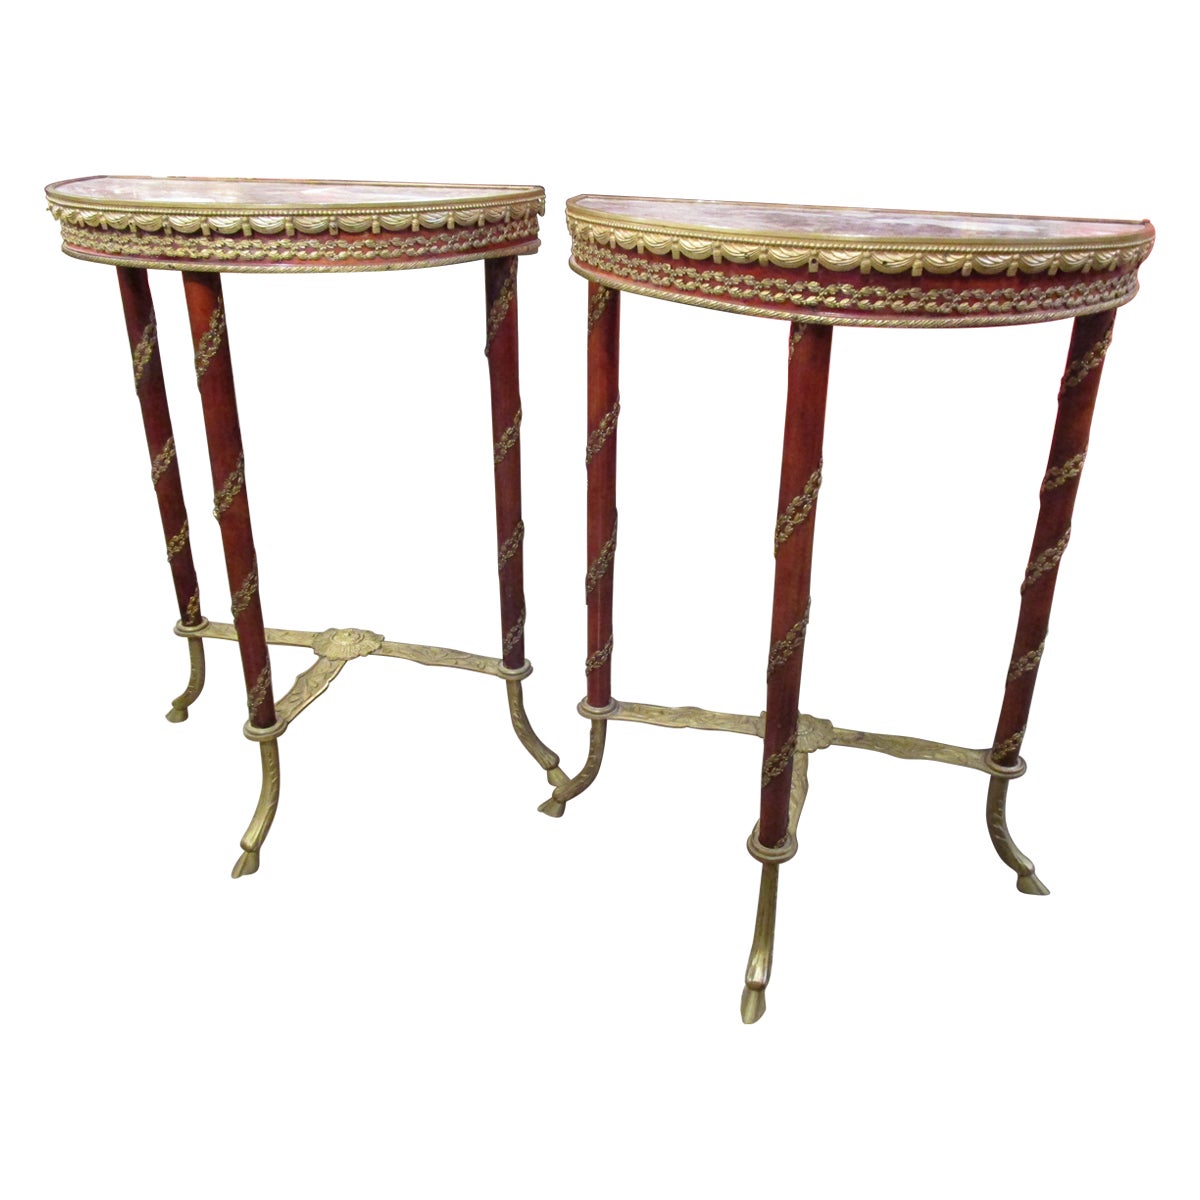 Fine Pair of French Louis XVI Mahogany and Gilt Bronze Gueridon Tables